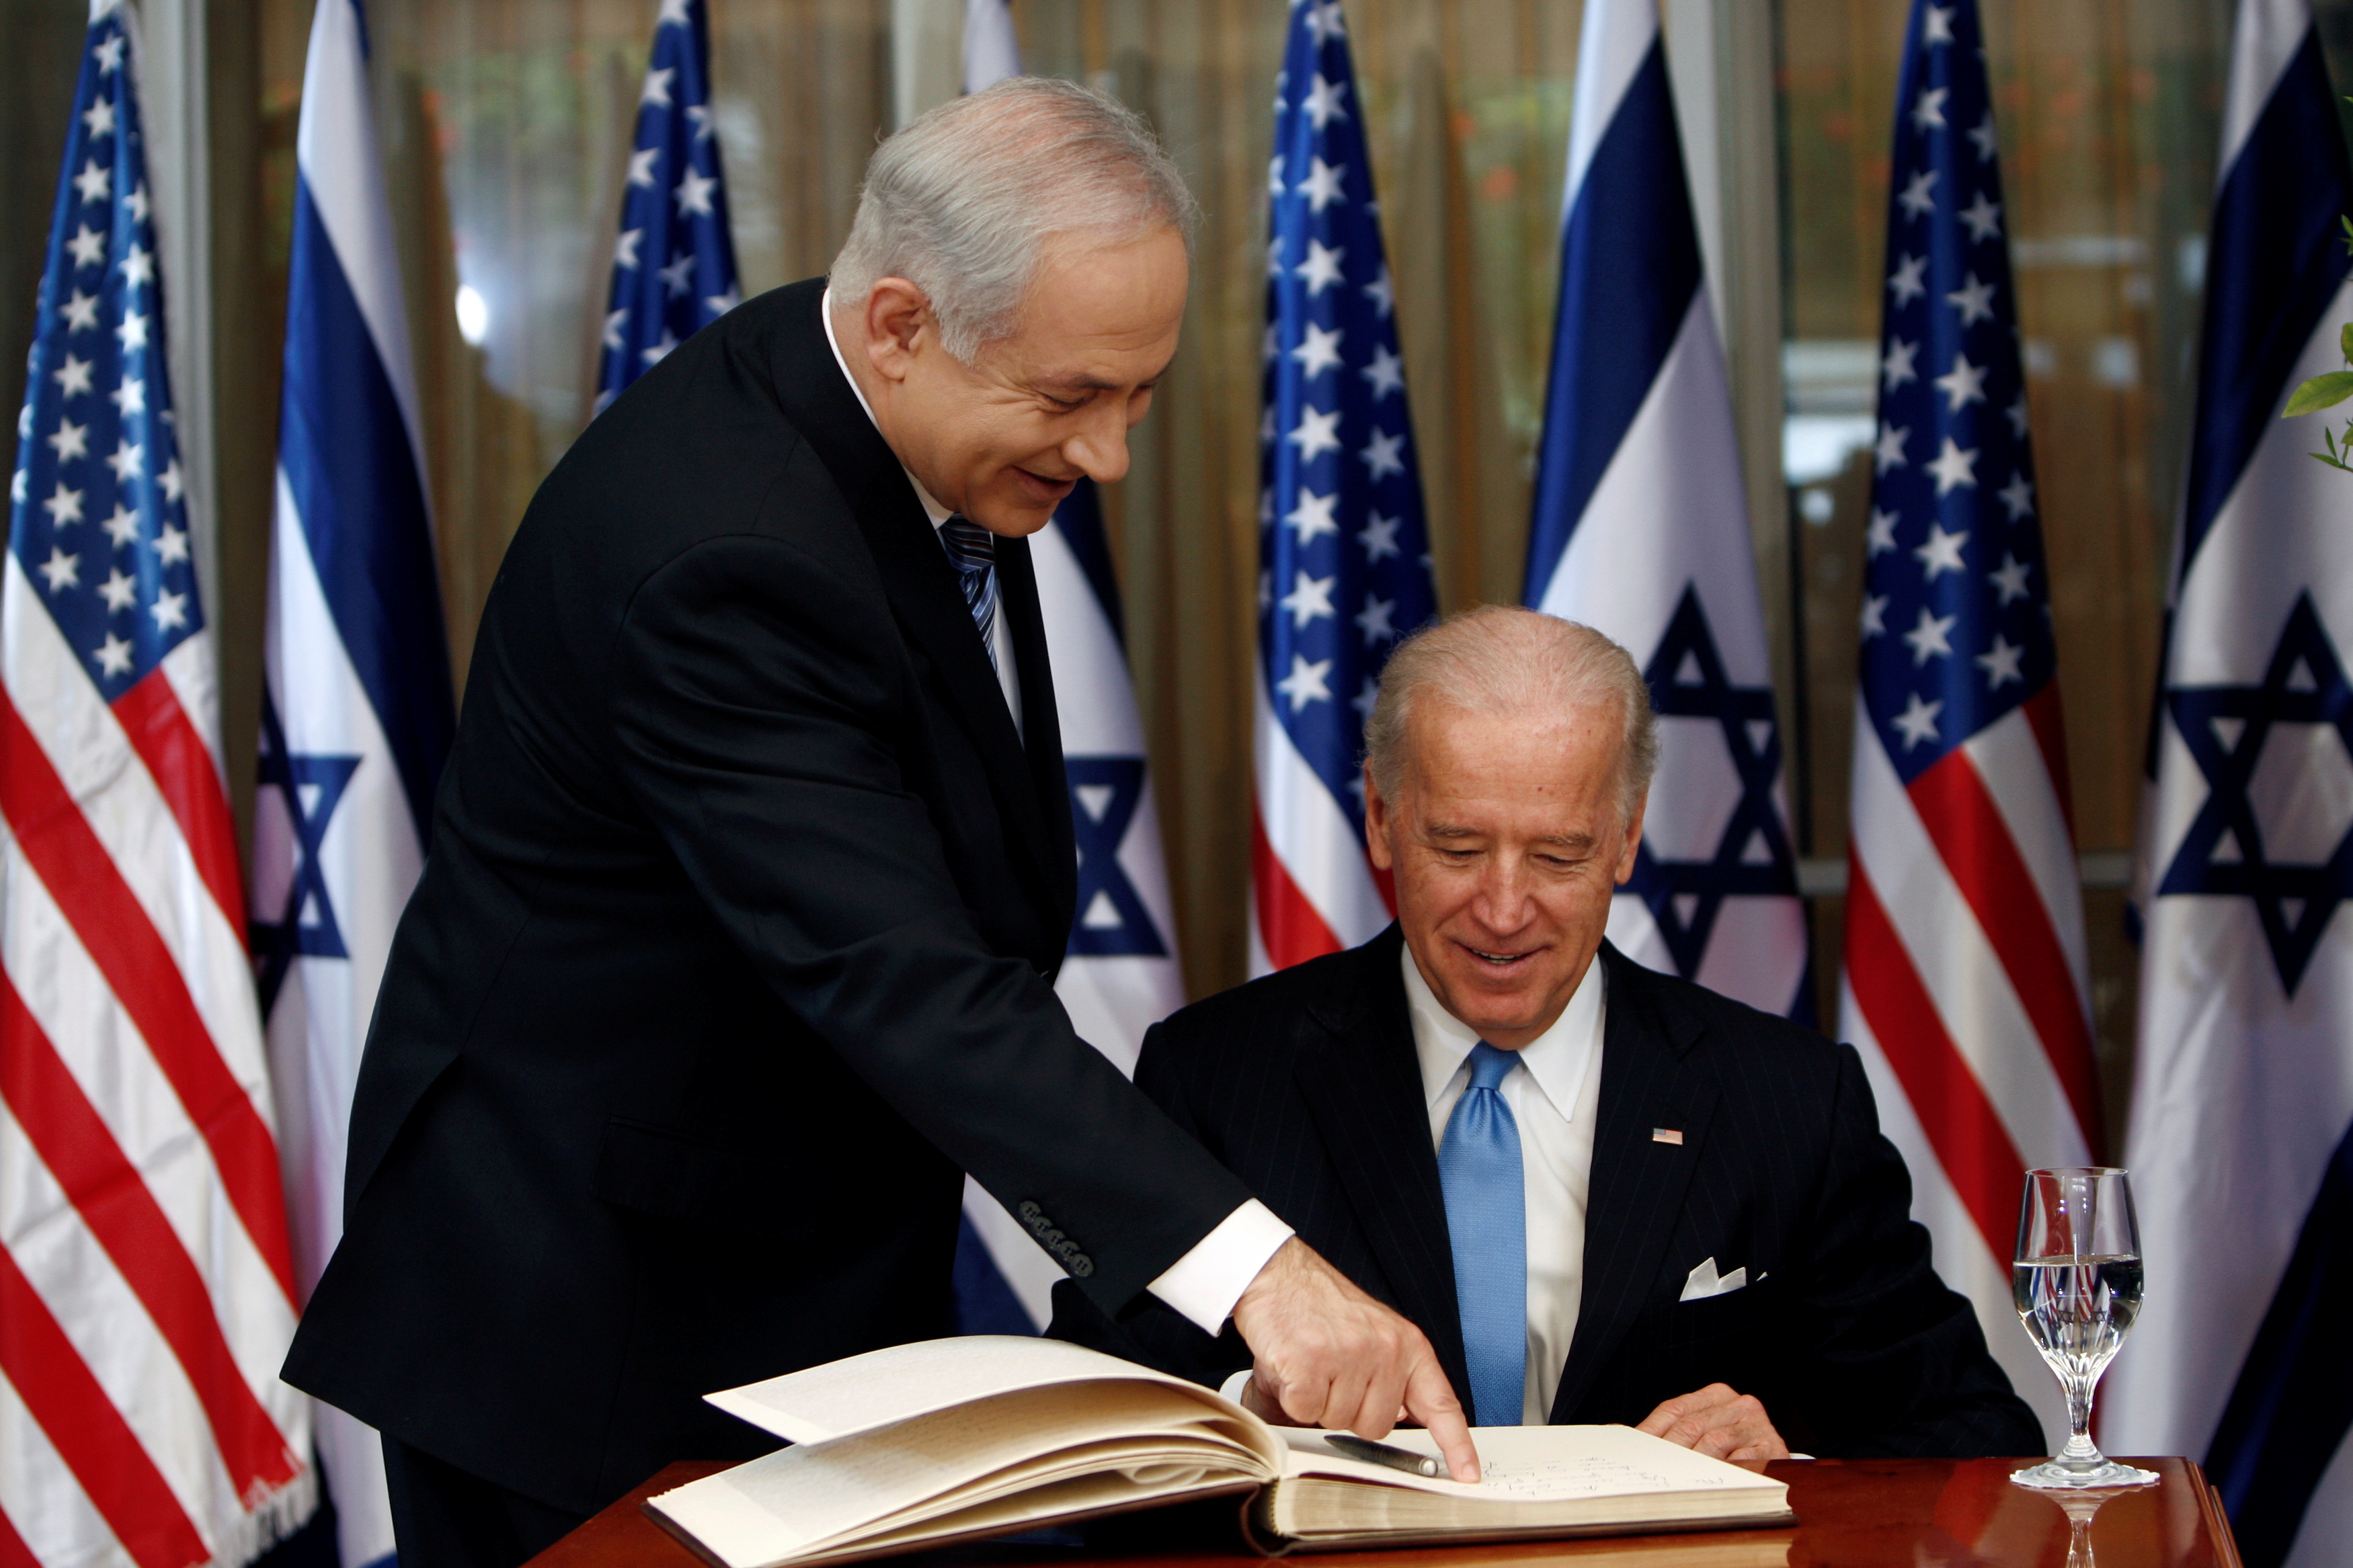 Joe Biden (R) prepares to sign the guest book at his meeting with Israel's Prime Minister Benjamin Netanyahu at the Israeli PM's residence in Jerusalem, 9 March 2010 (Reuters)